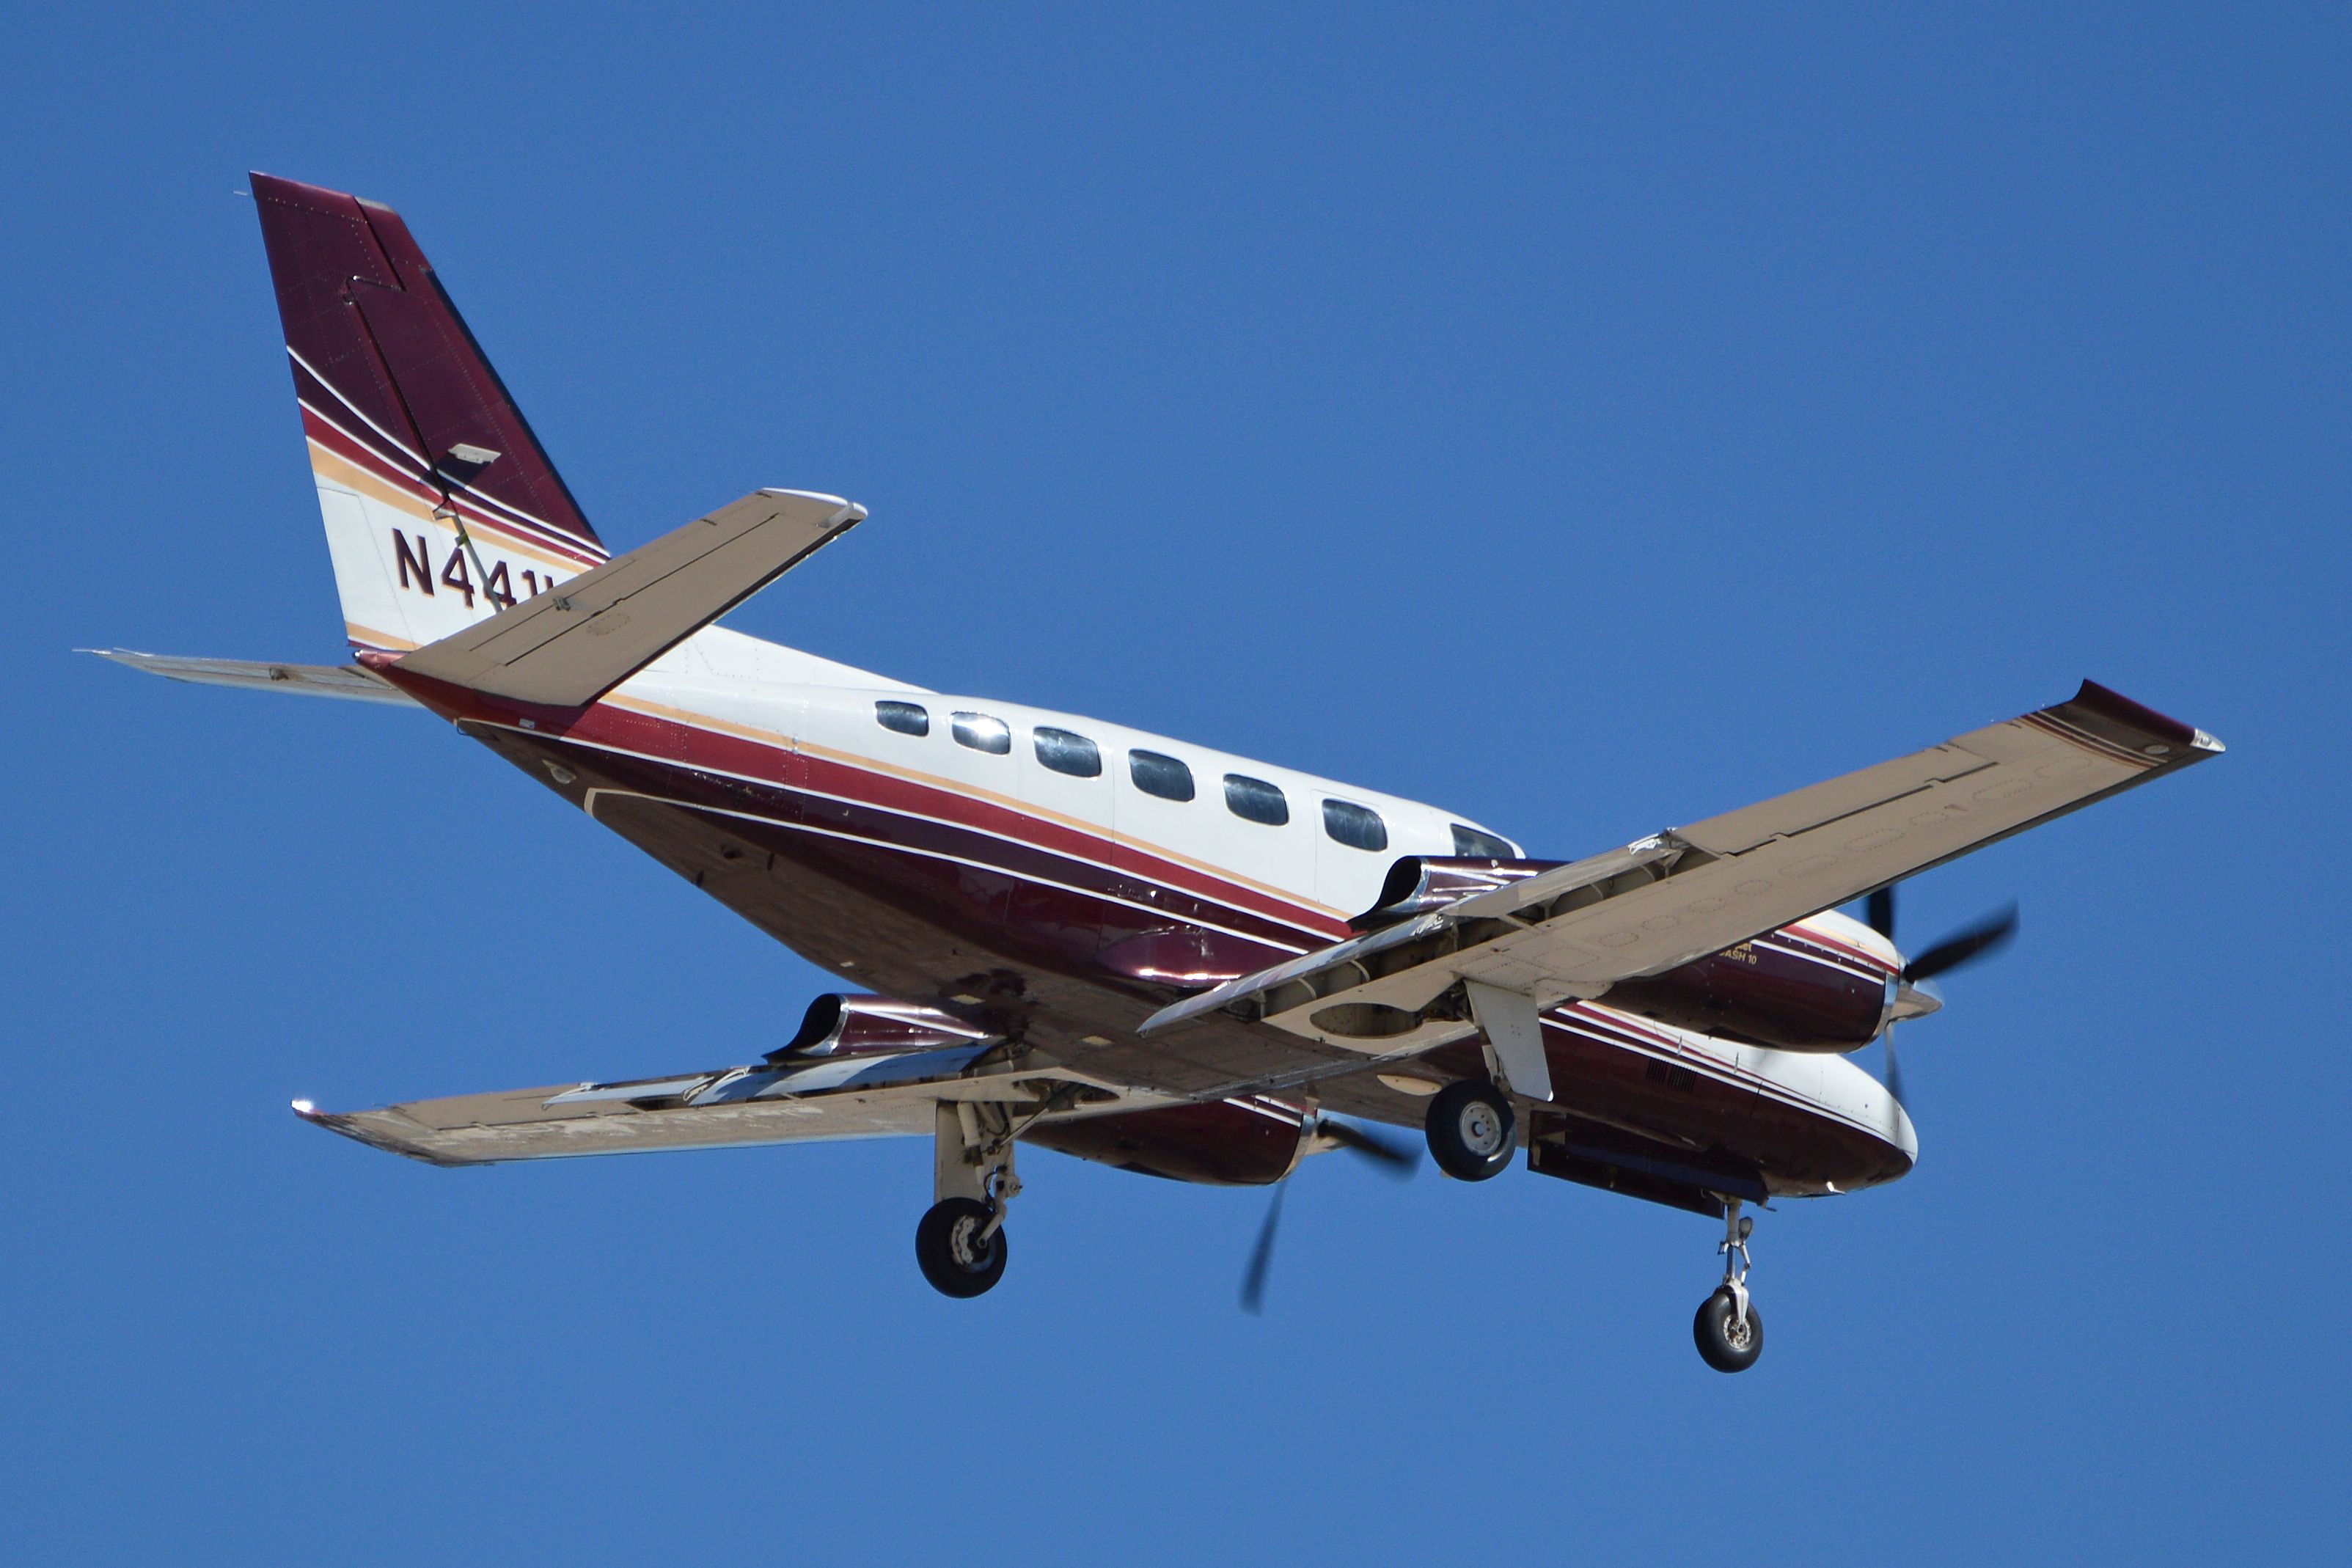 A Cessna 441 Conquest II flying in the sky.